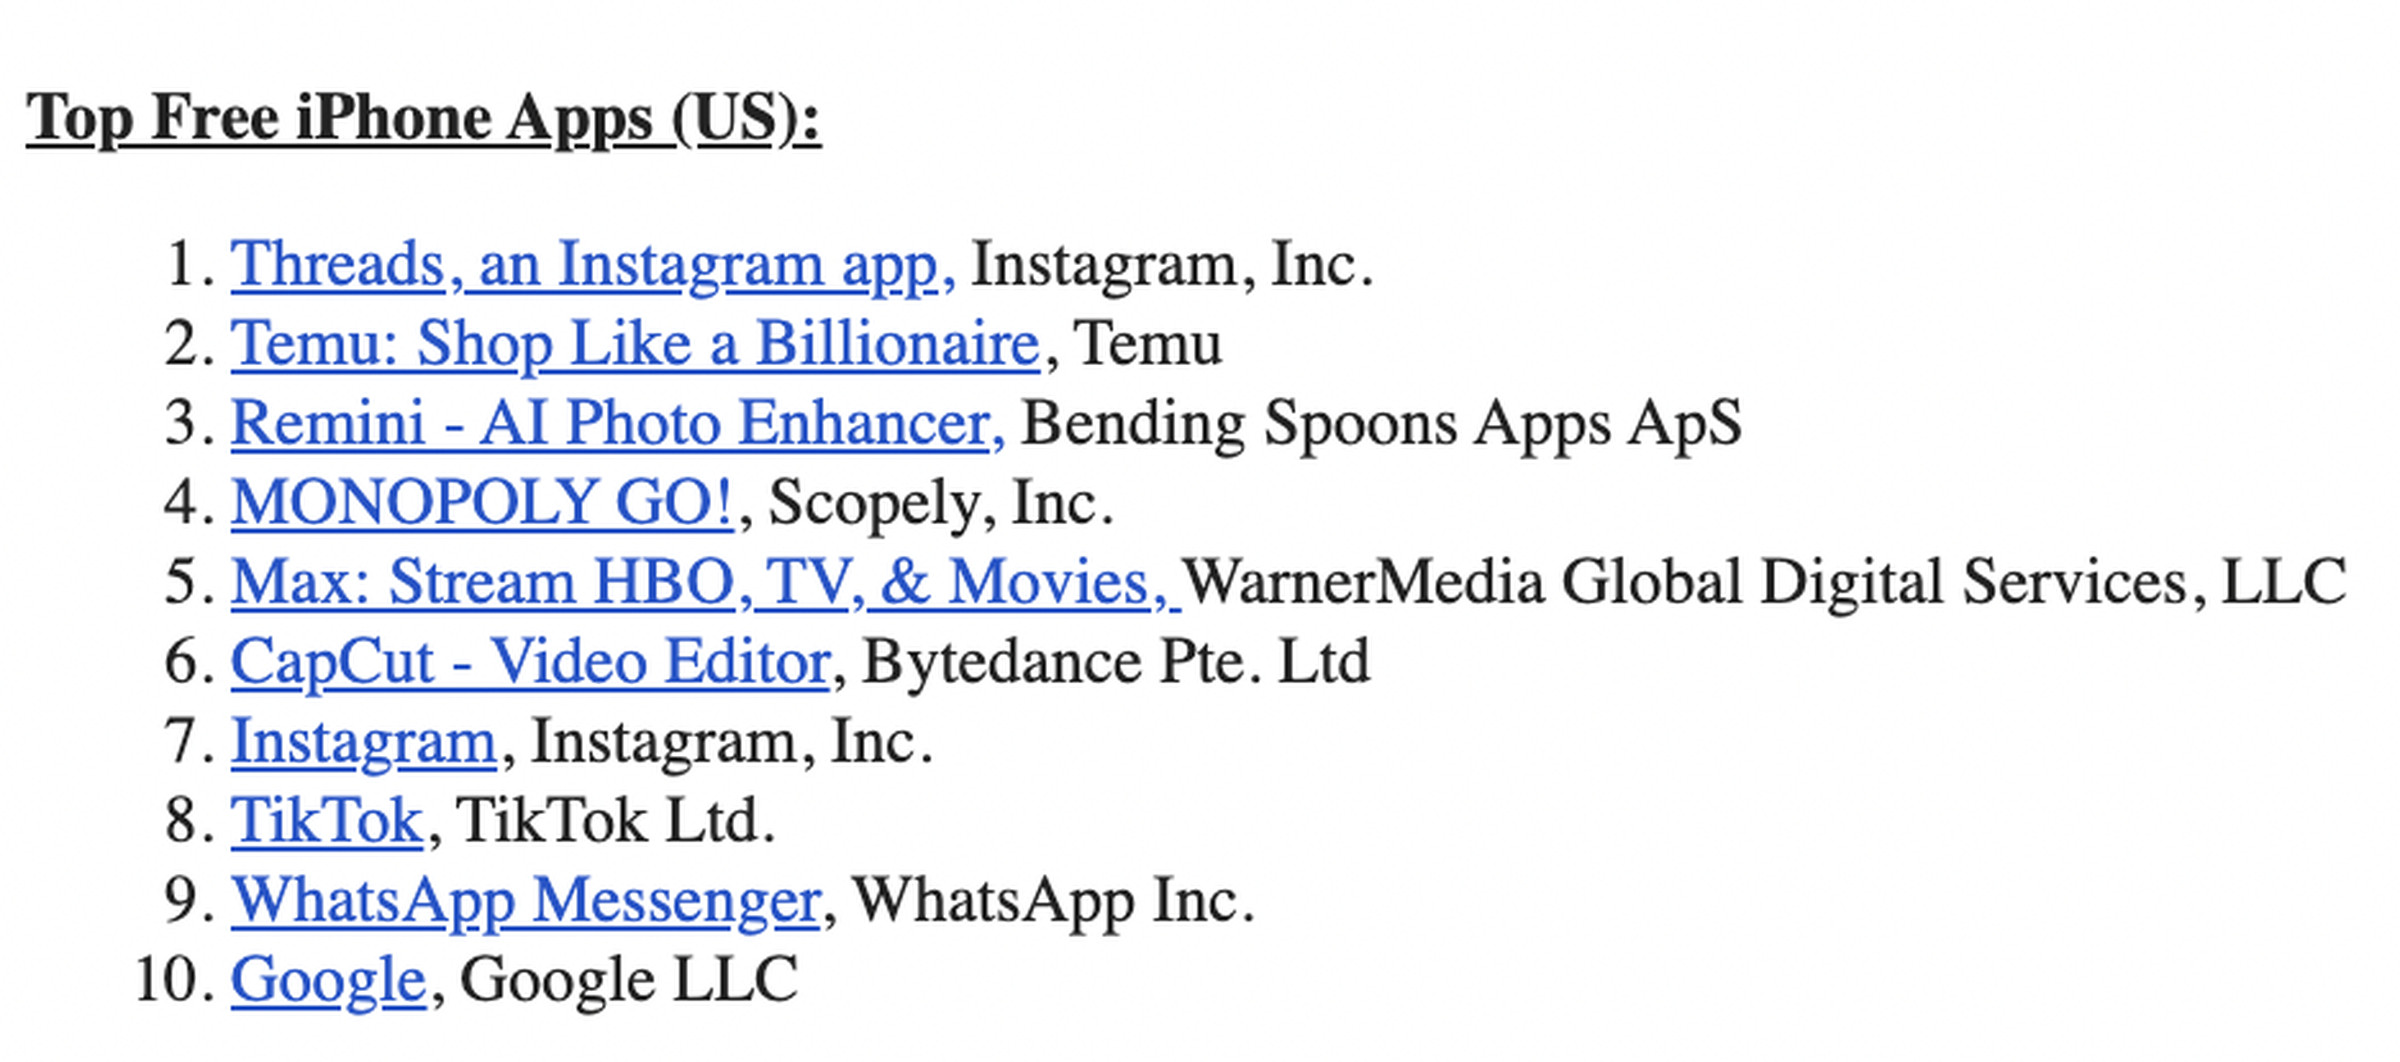 Threads was the number one free app last week, followed by Temu and Remini.